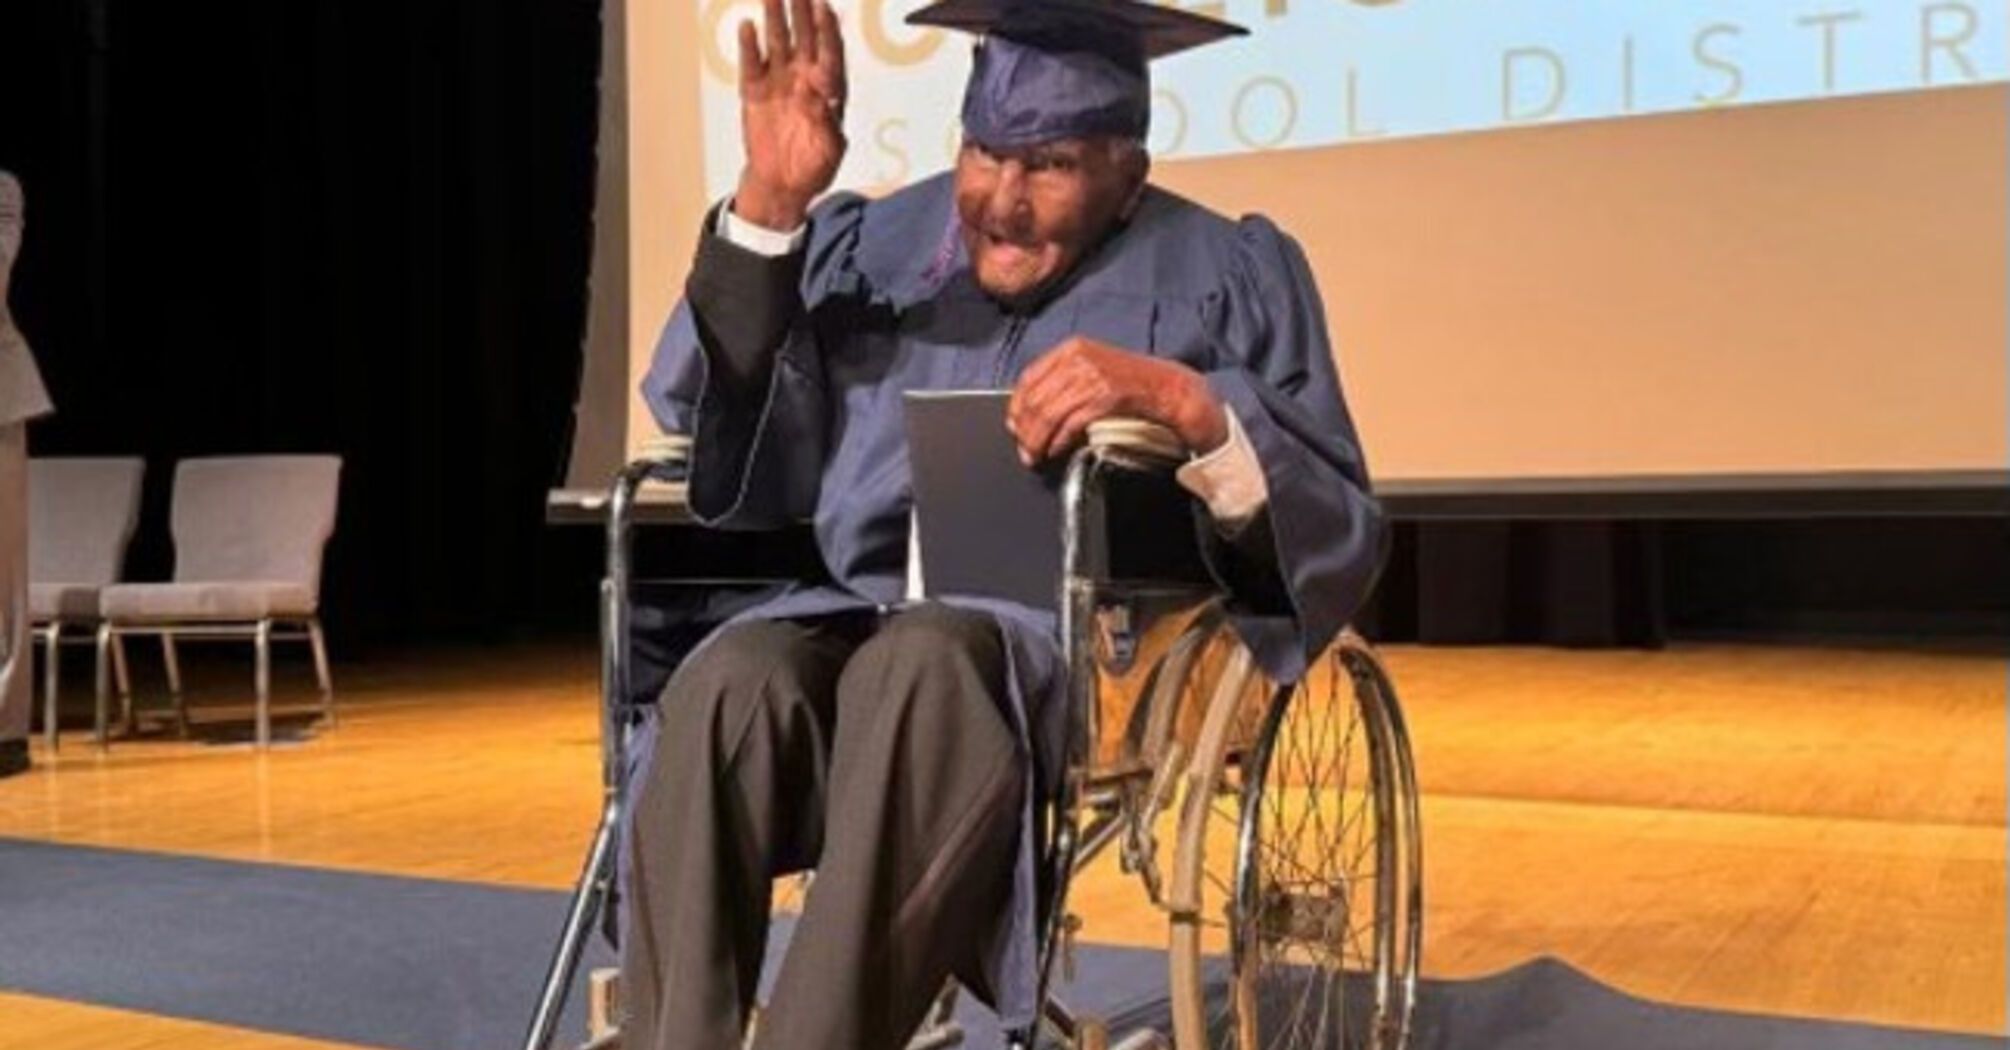 Man graduated from school at 106 years old